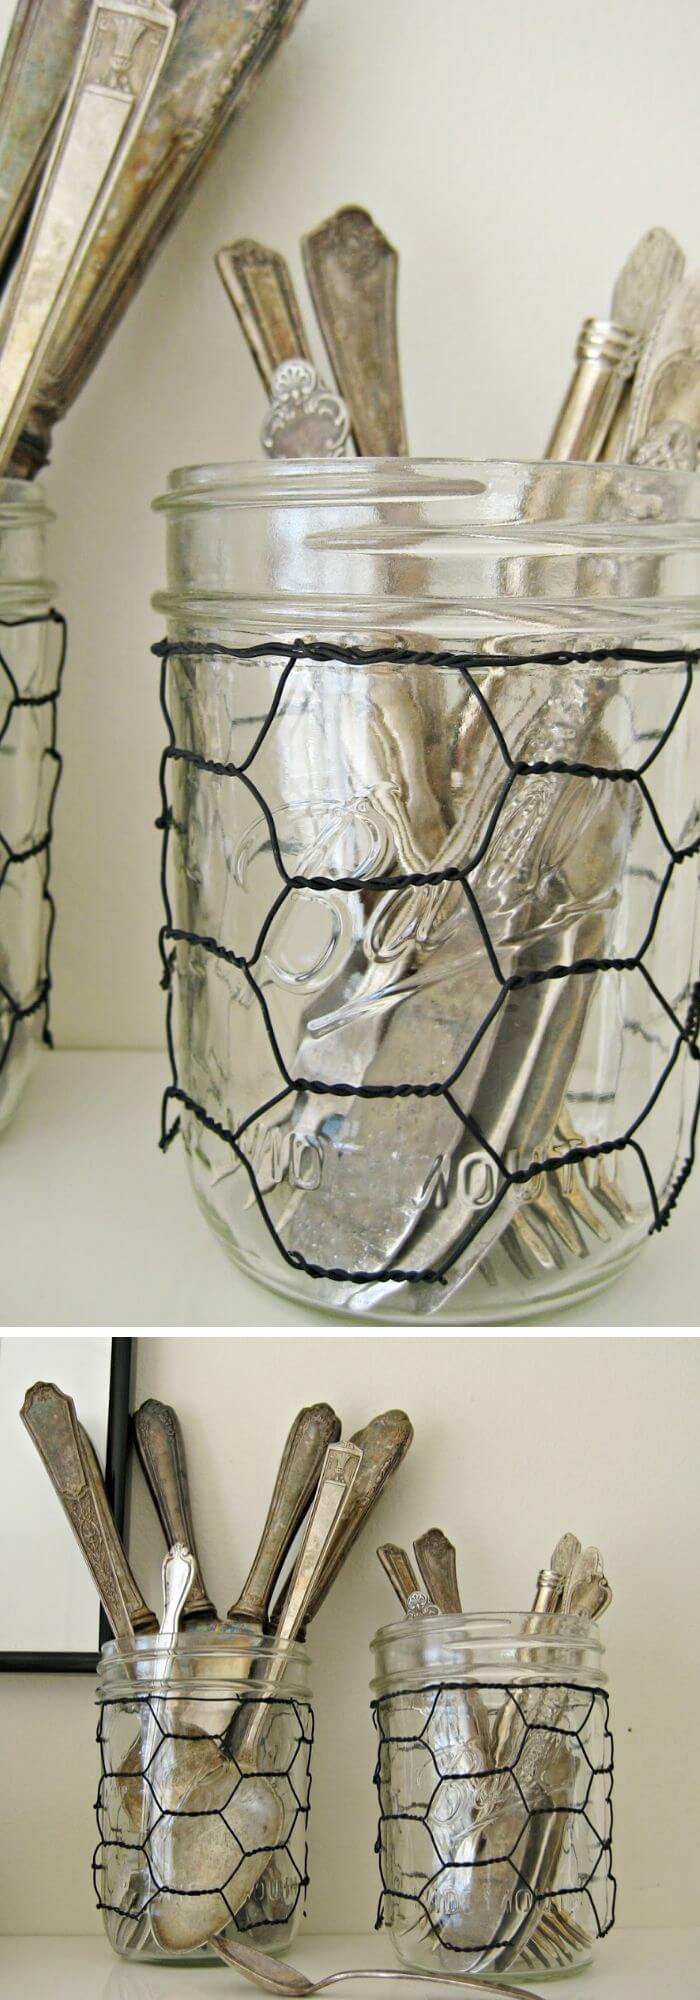 16 chicken wire projects